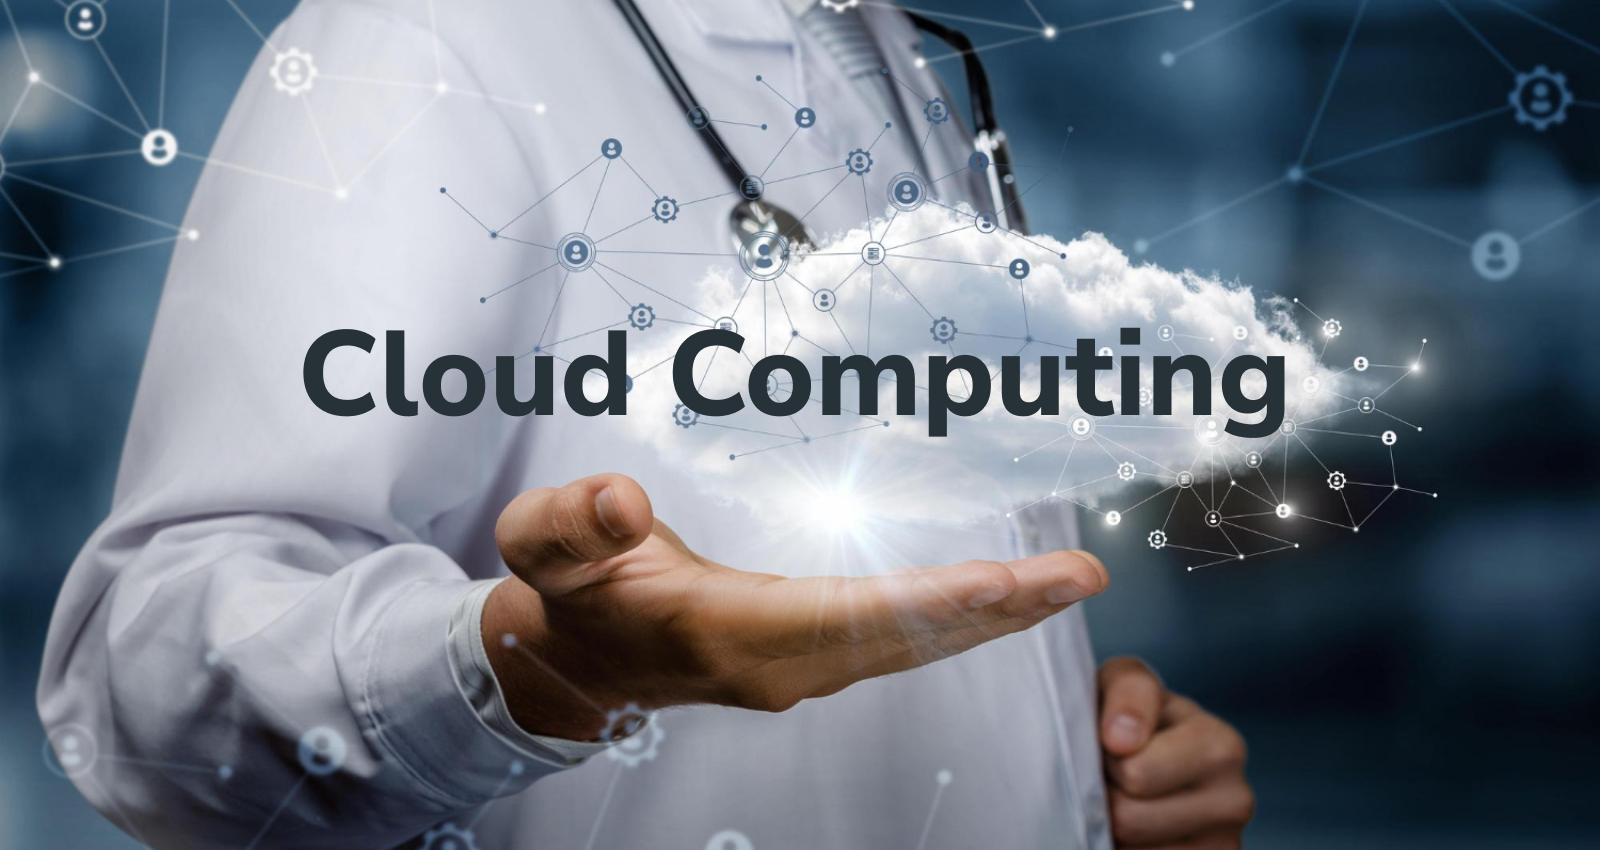 Cloud Computing Benefits & Use cases, Healthcare Industry, Hospital, Healthcare revolution